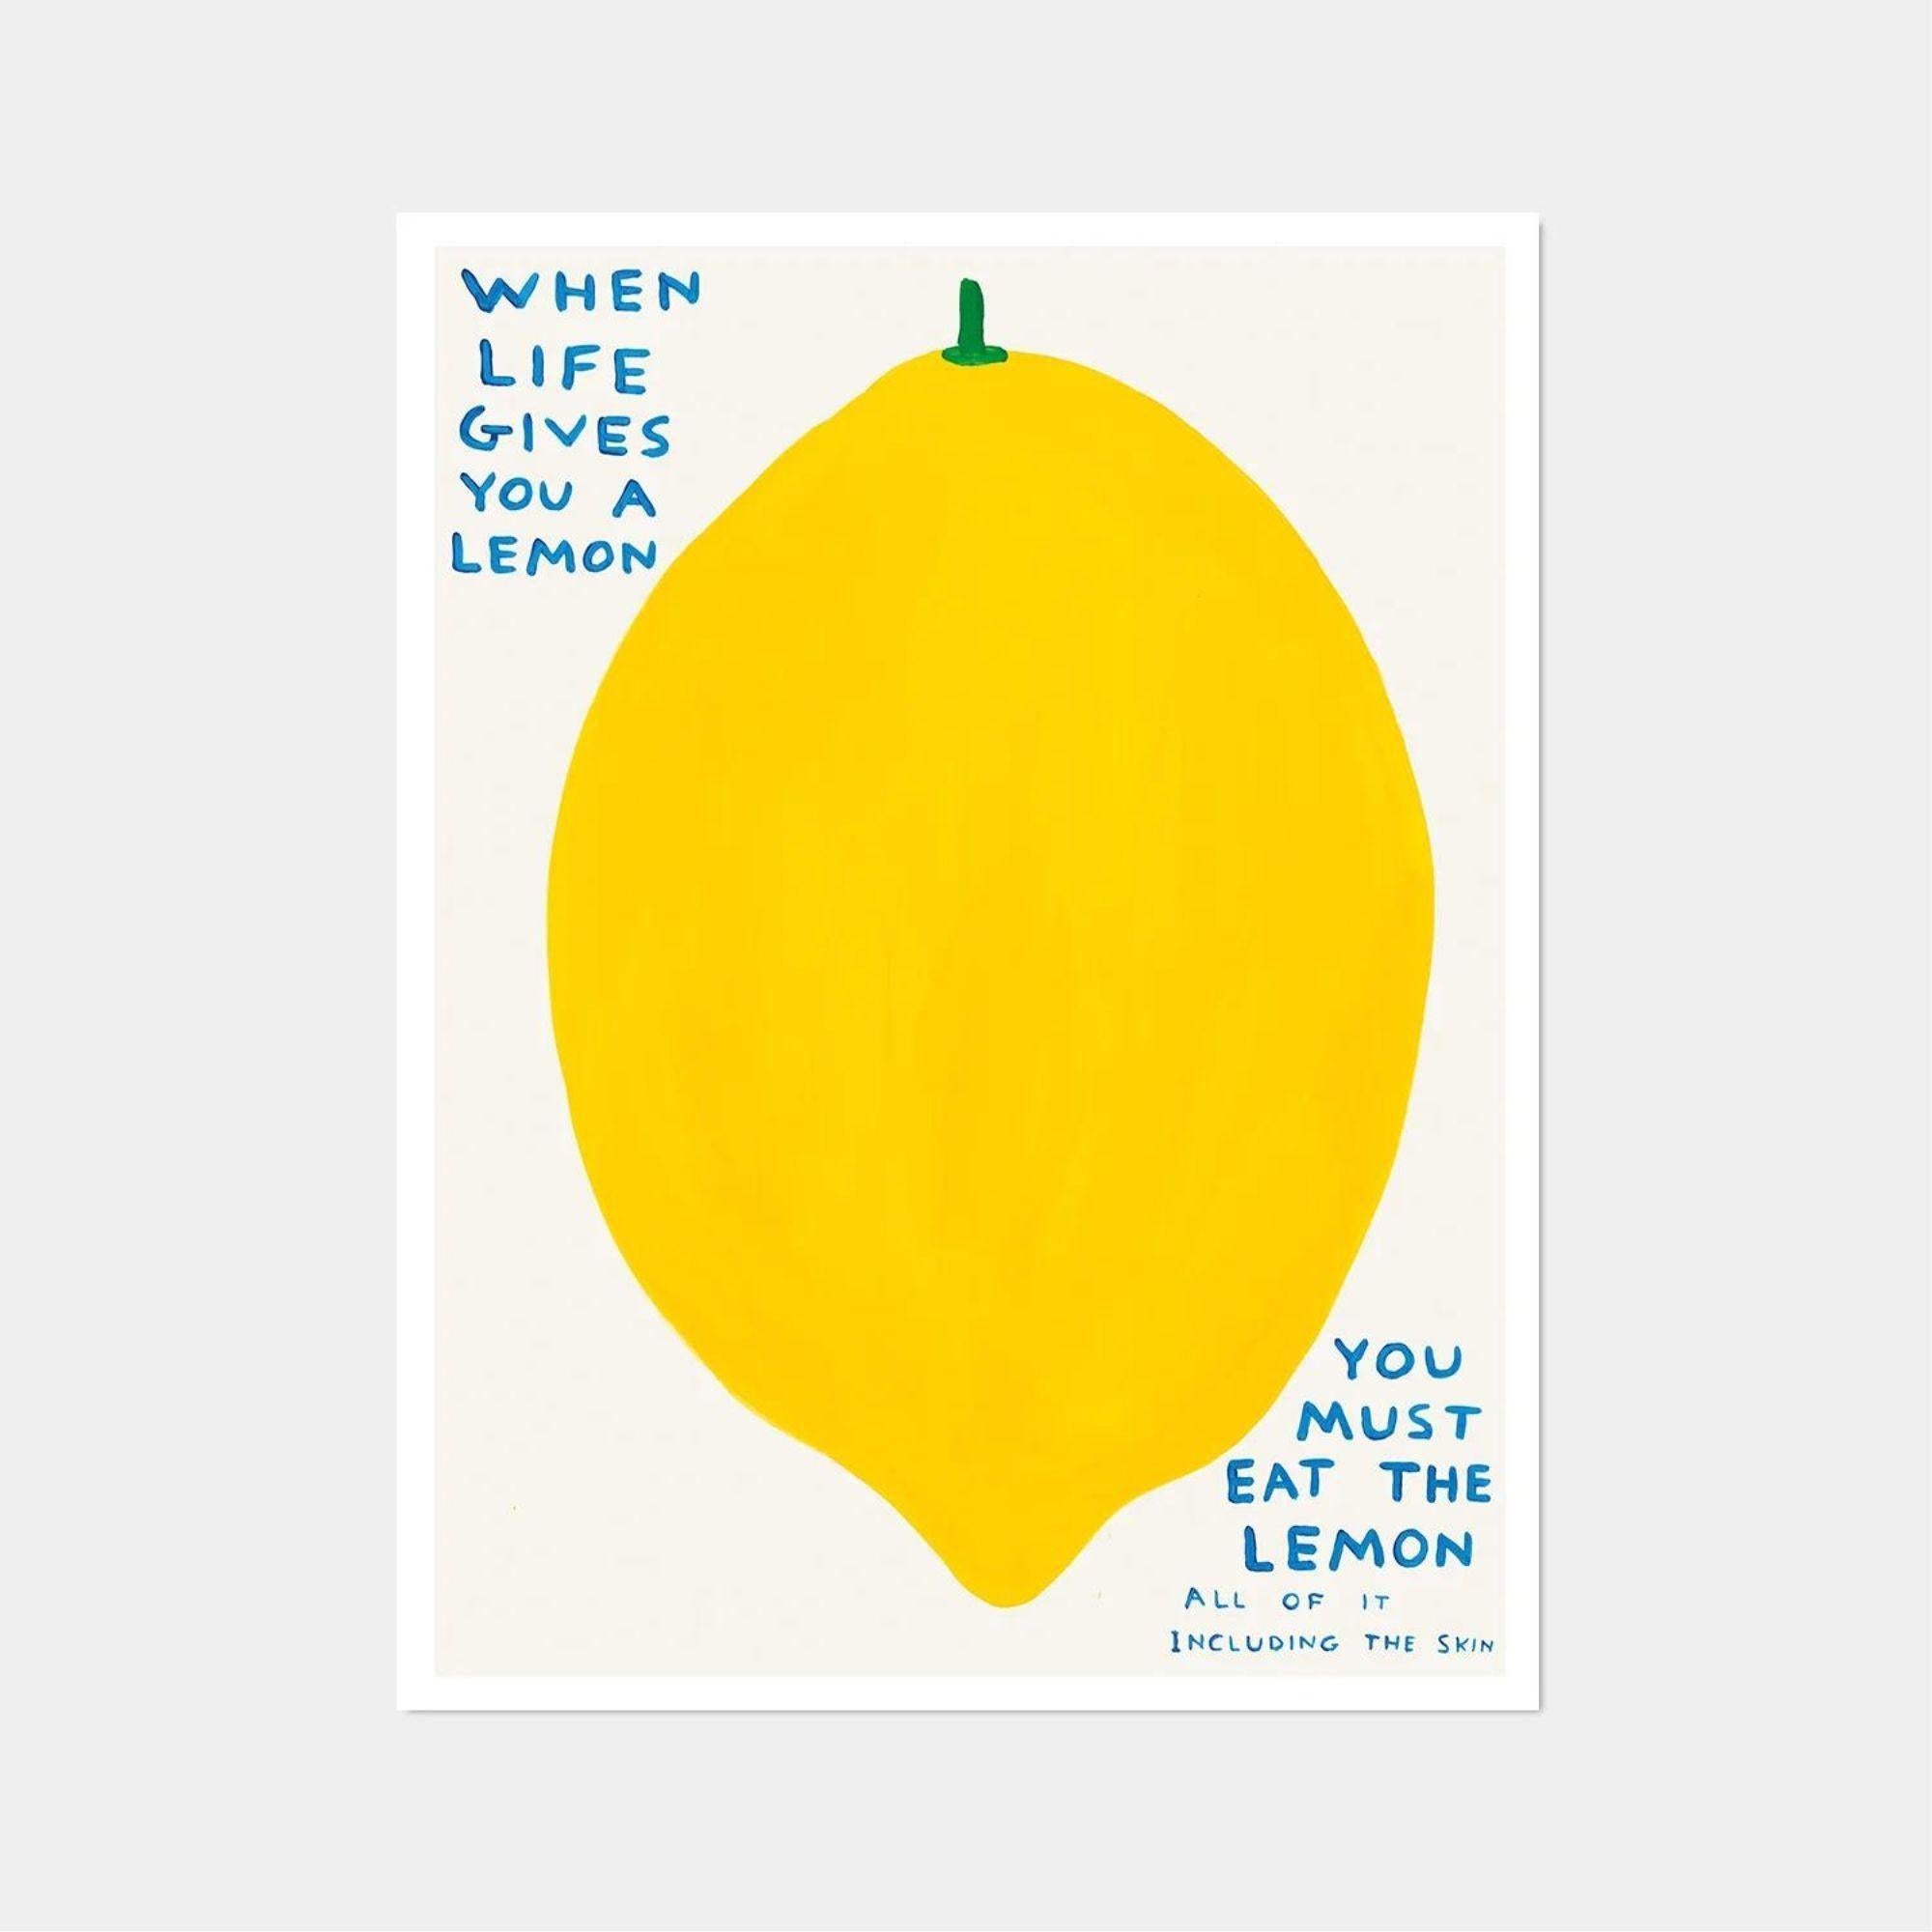 When Life Gives You A Lemon  - Print by David Shrigley